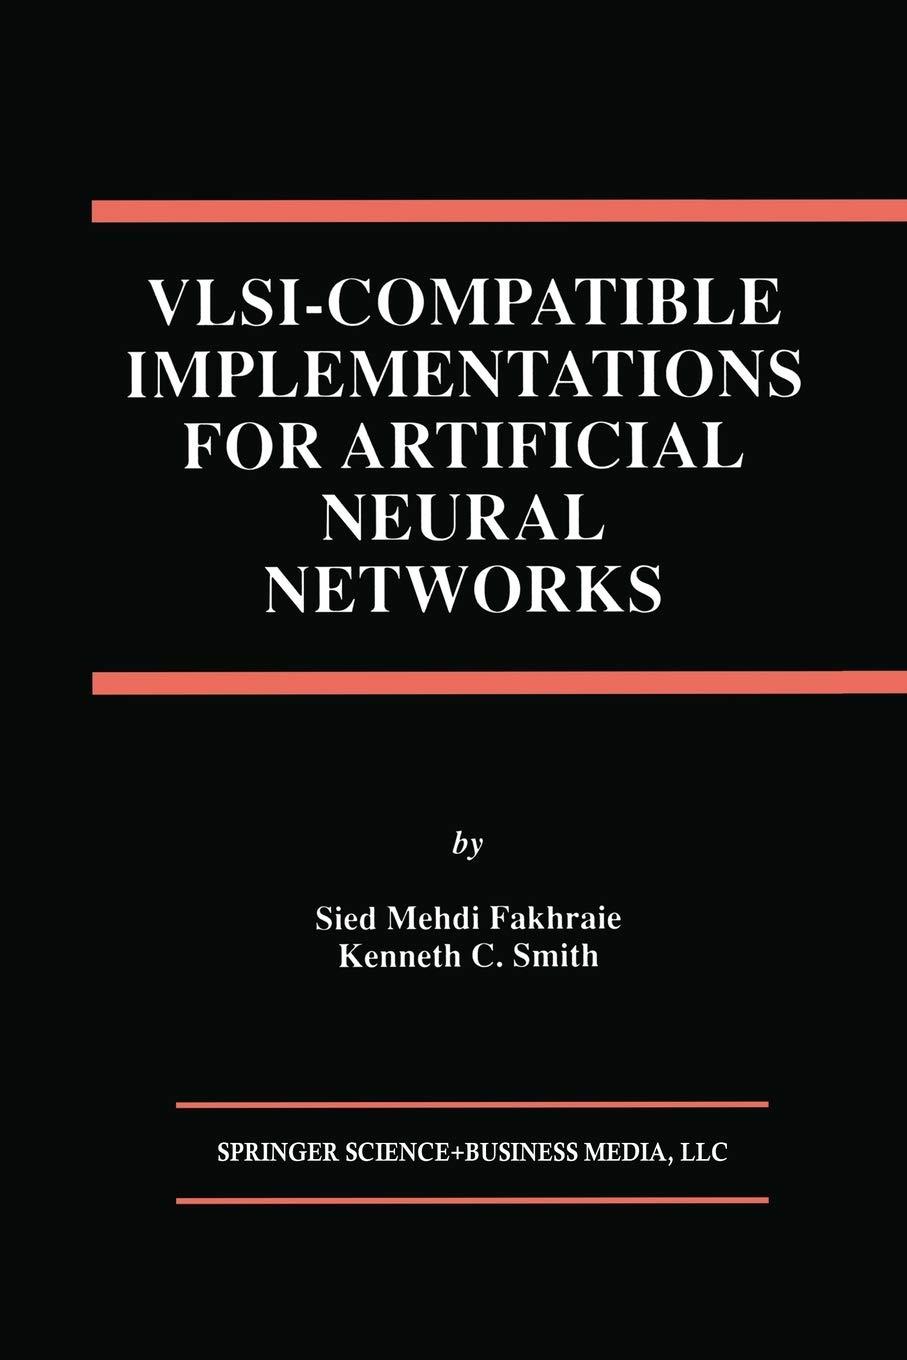 vlsi compatible implementations for artificial neural networks 1997 edition sied mehdi fakhraie, kenneth c.